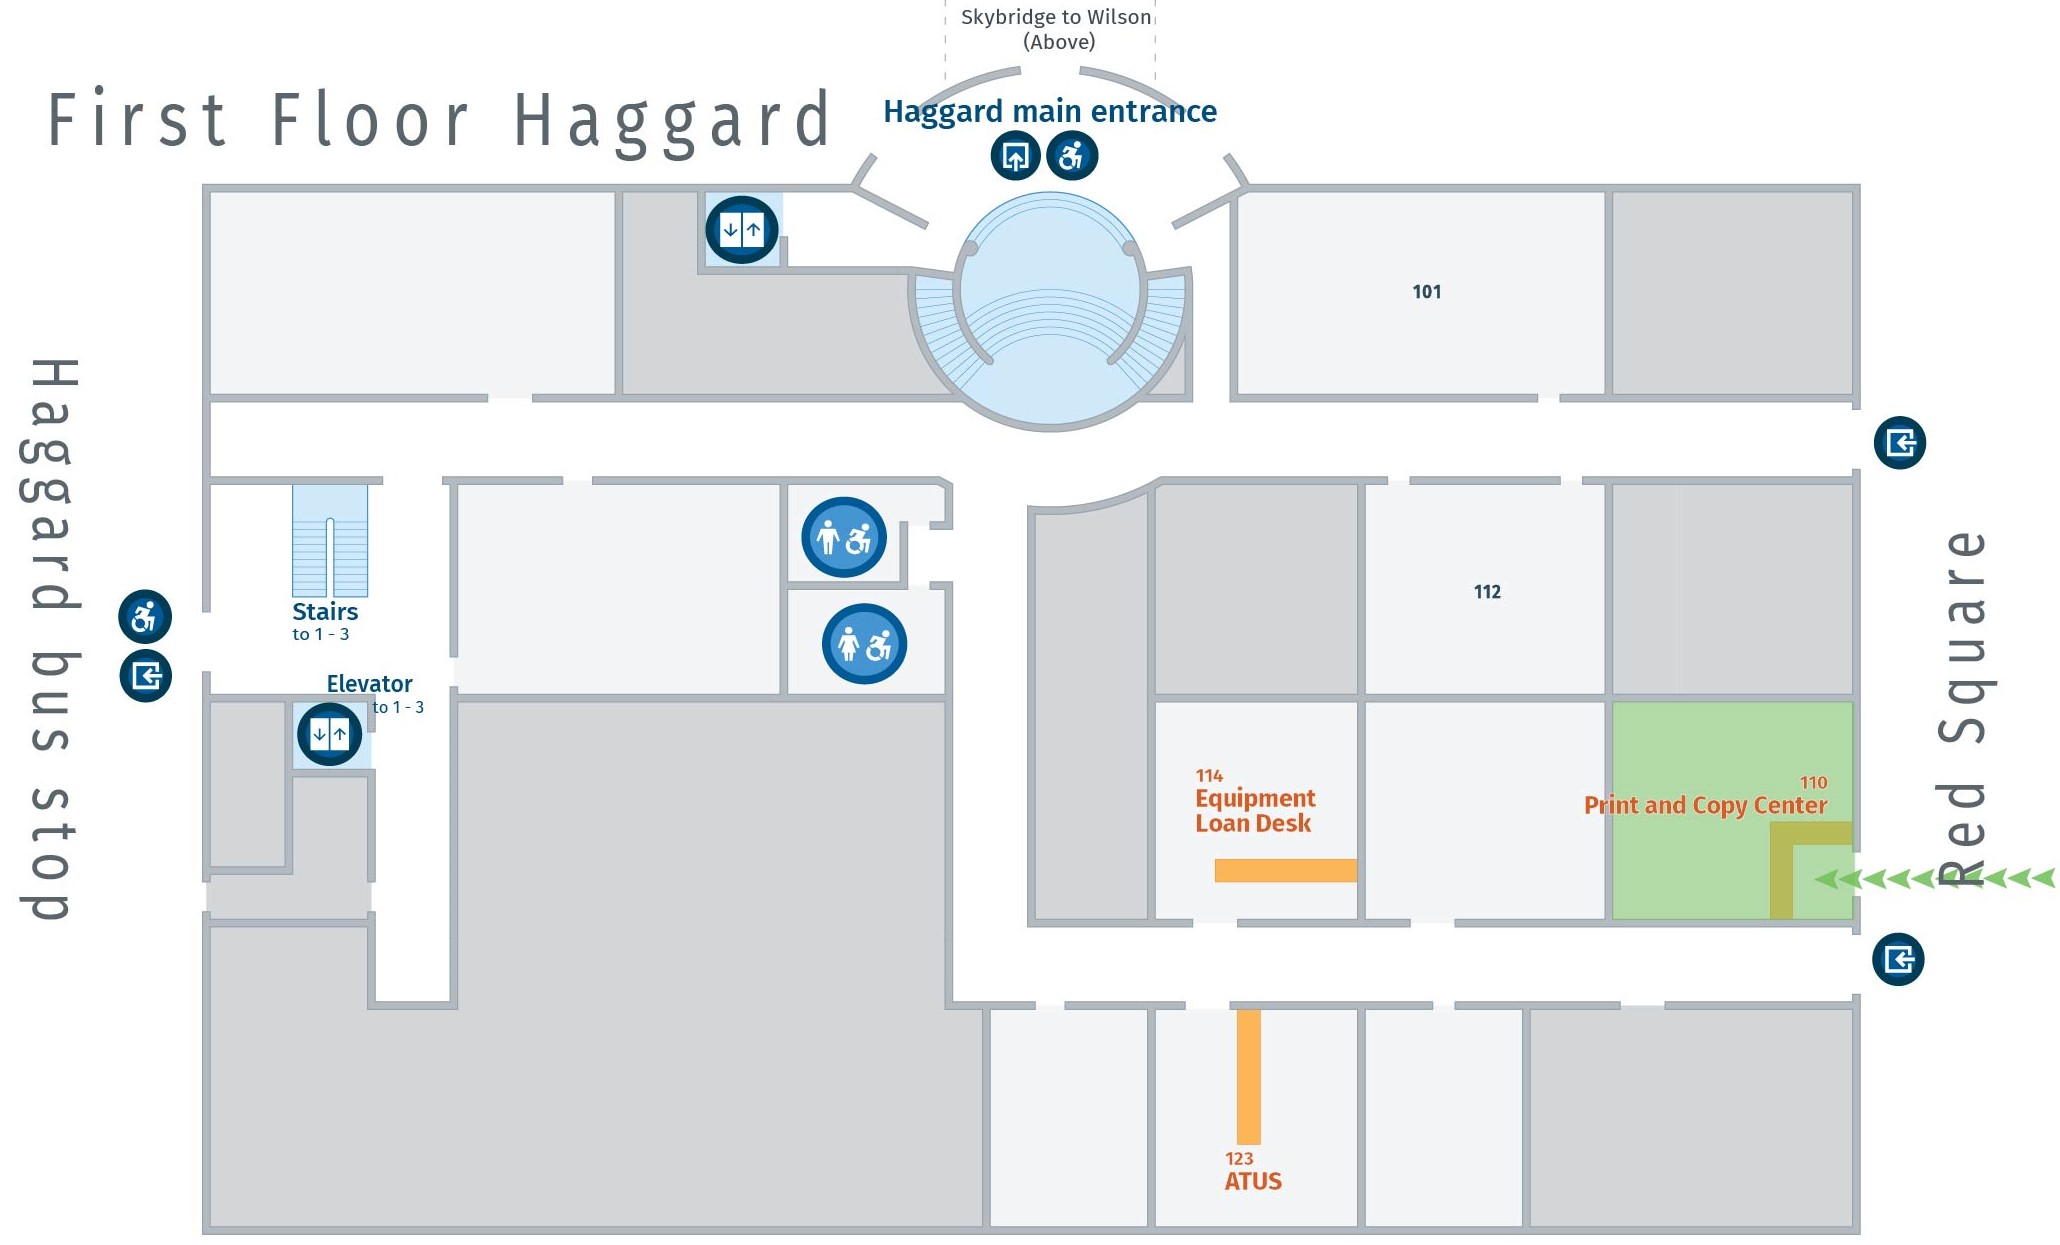 Floor plan, first floor of Haggard with path to Print and Copy Center.